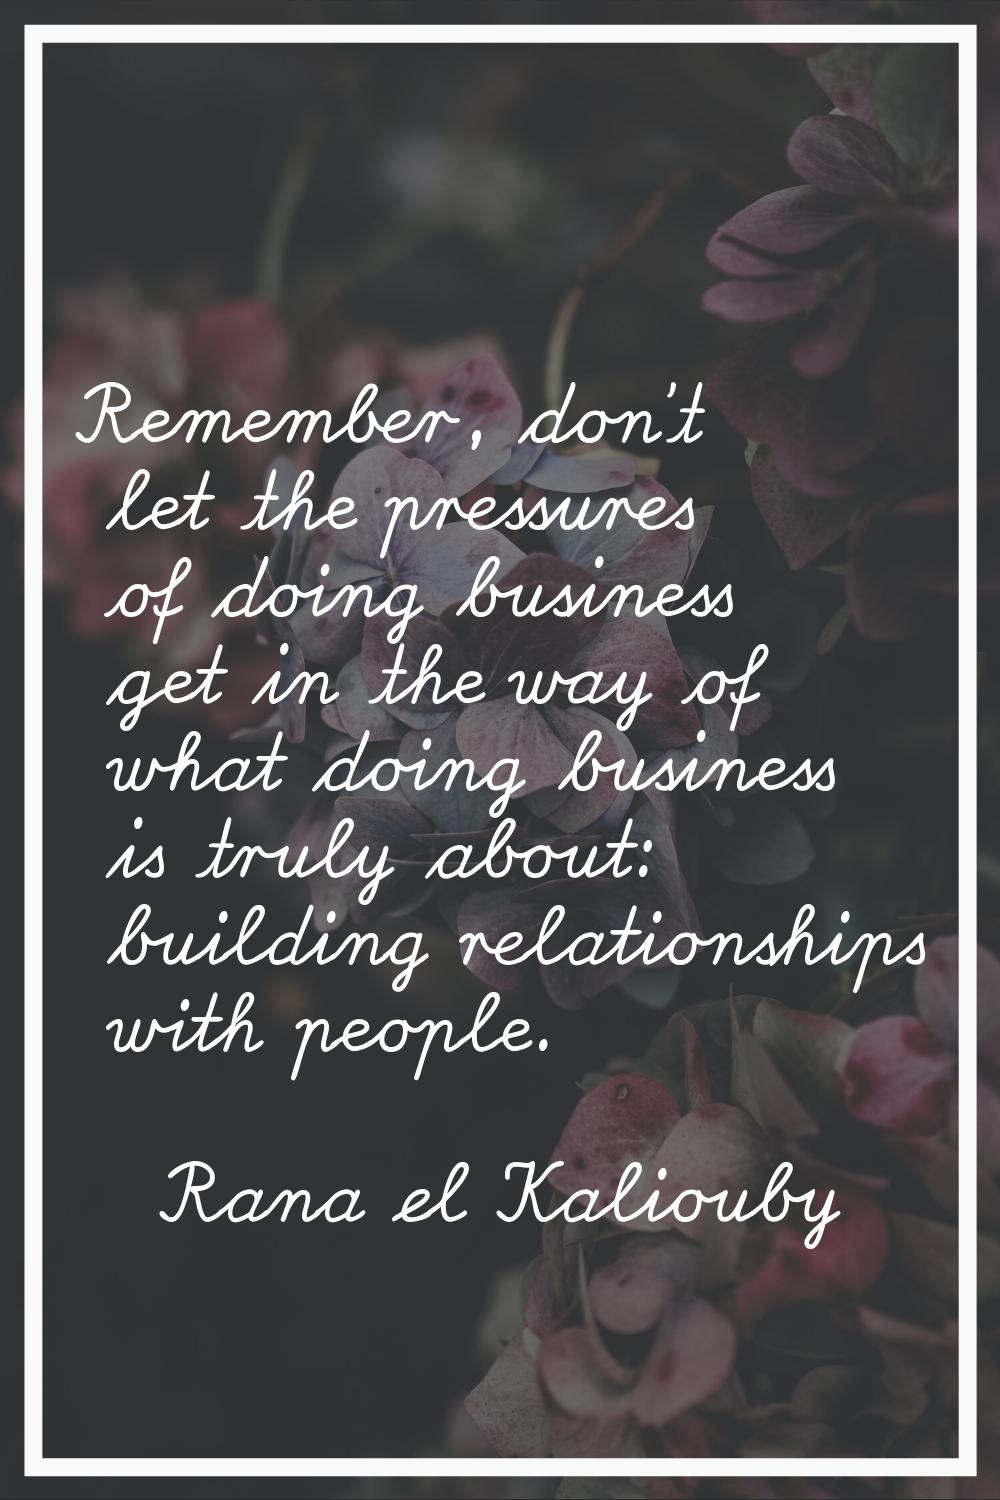 Remember, don't let the pressures of doing business get in the way of what doing business is truly 